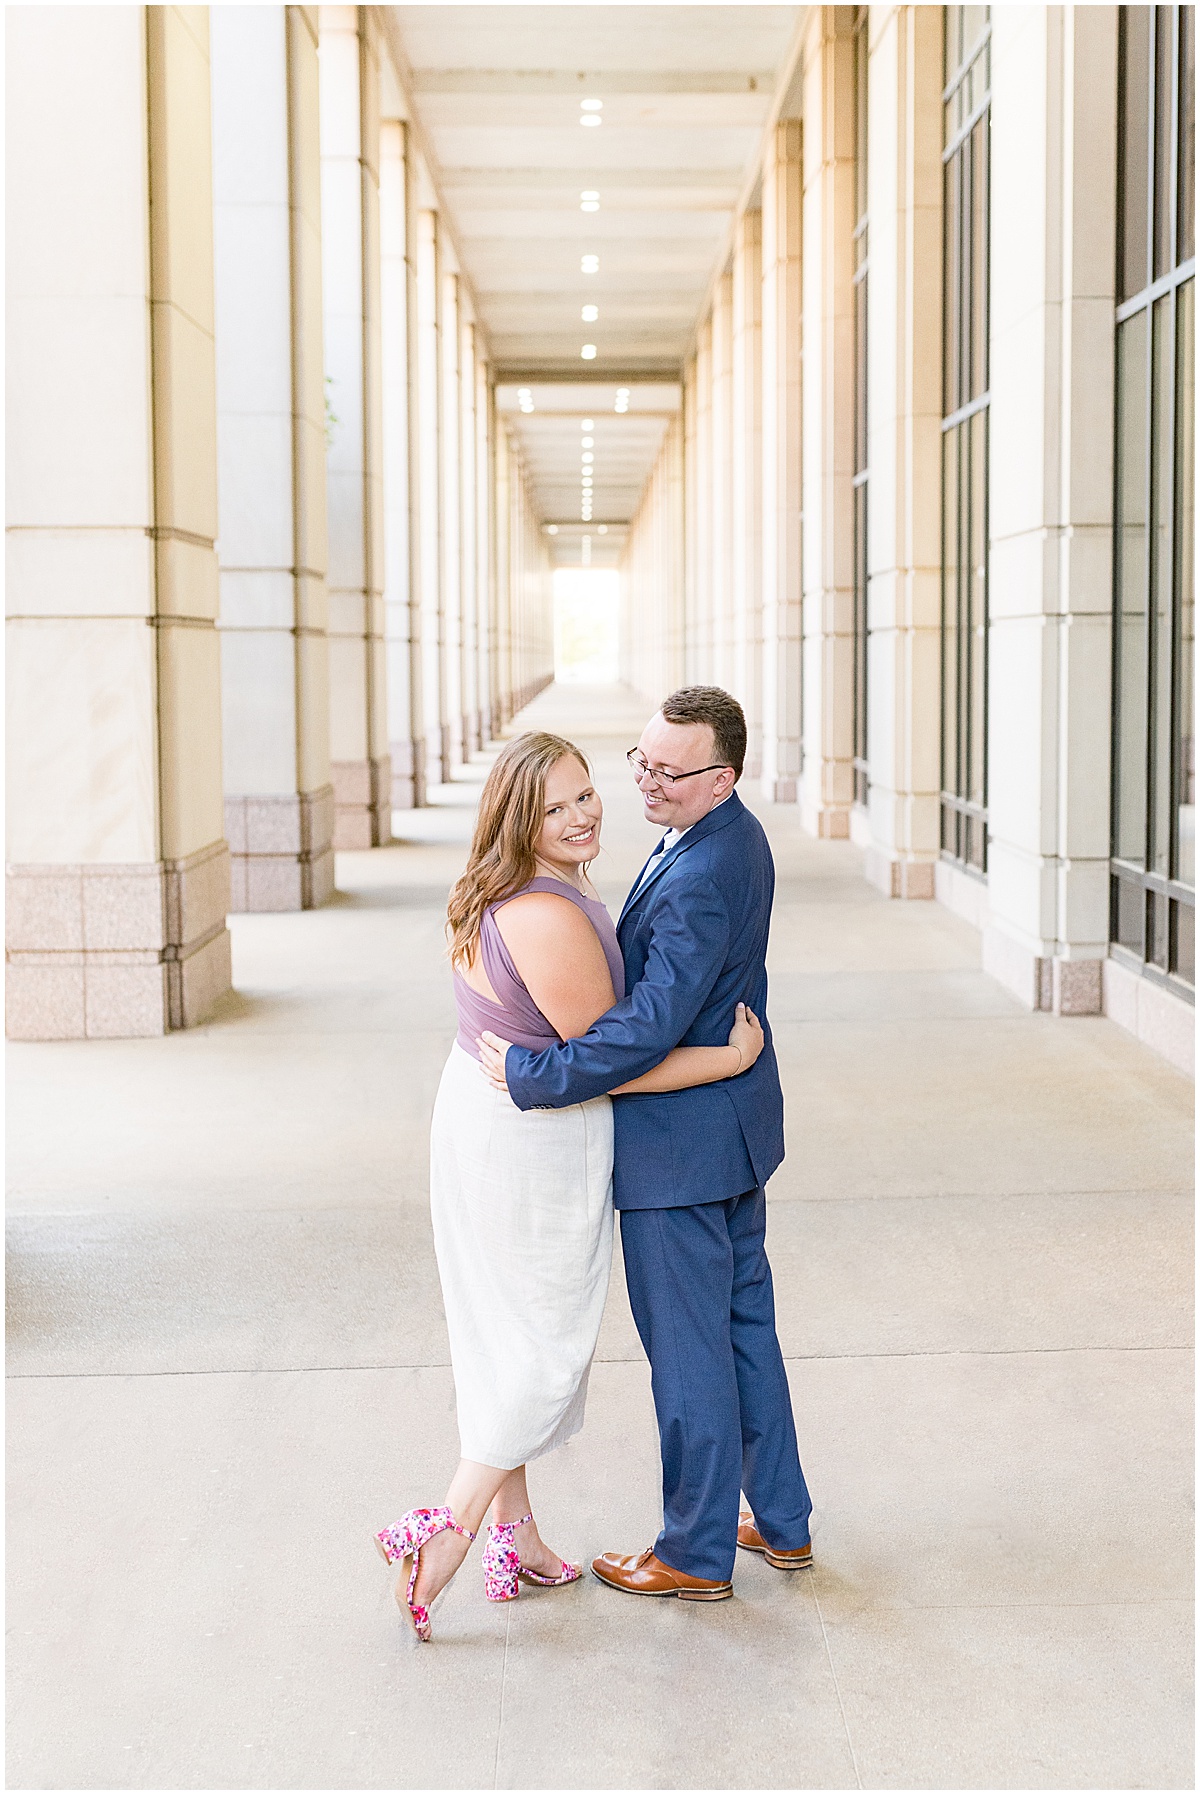 Couple walking together during engagement photos in downtown Indianapolis by the Indiana Government Center.